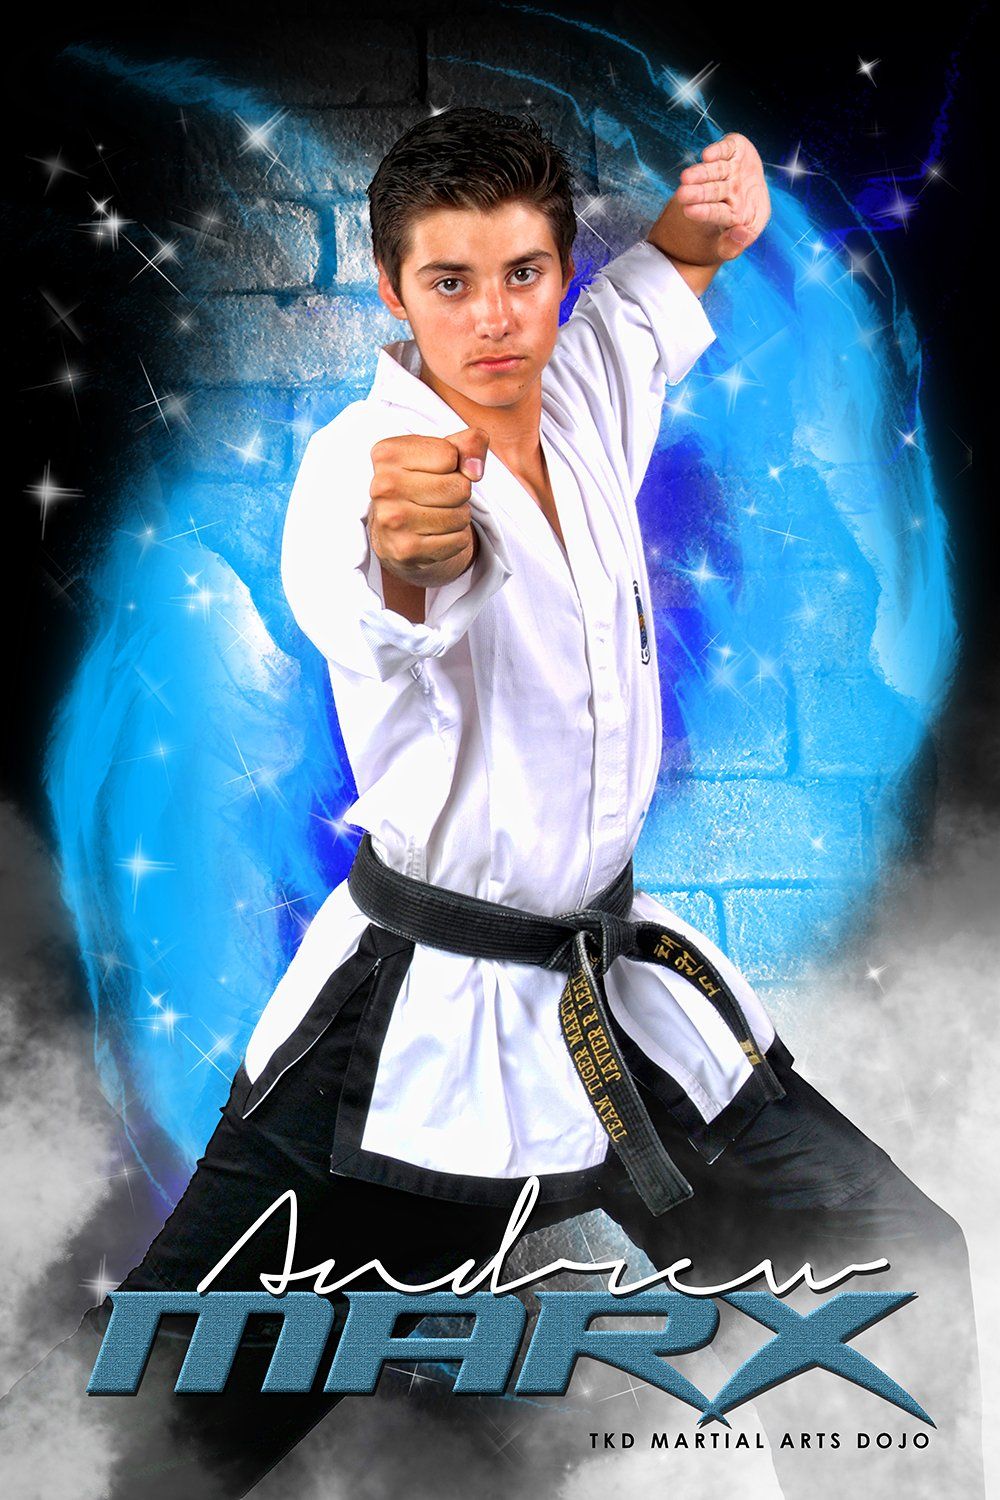 Brick Fire - Martial Arts Series - Poster/Banner V-Photoshop Template - Photo Solutions